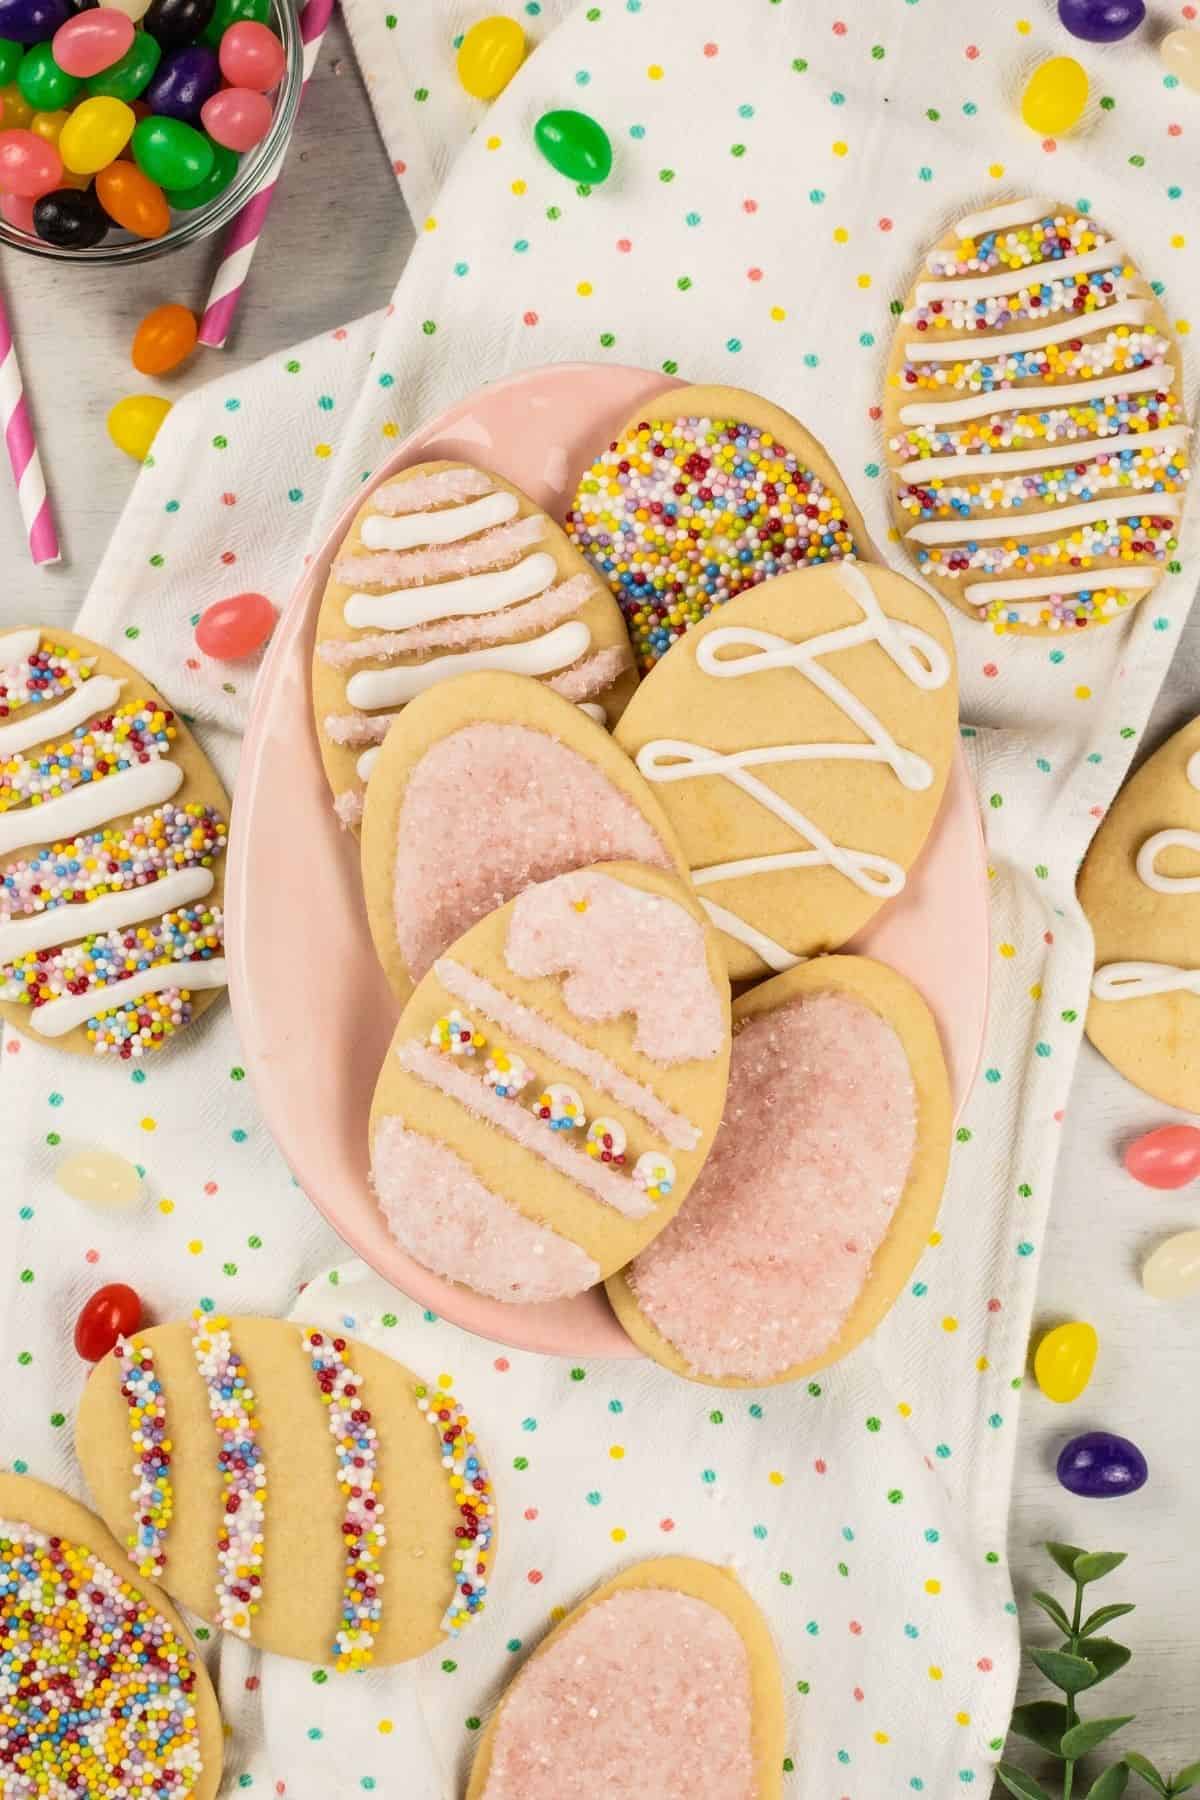 A table scape of sugar cookies for Easter cut into egg shapes. A multicolored towel and lots of jelly beans are also on the table.